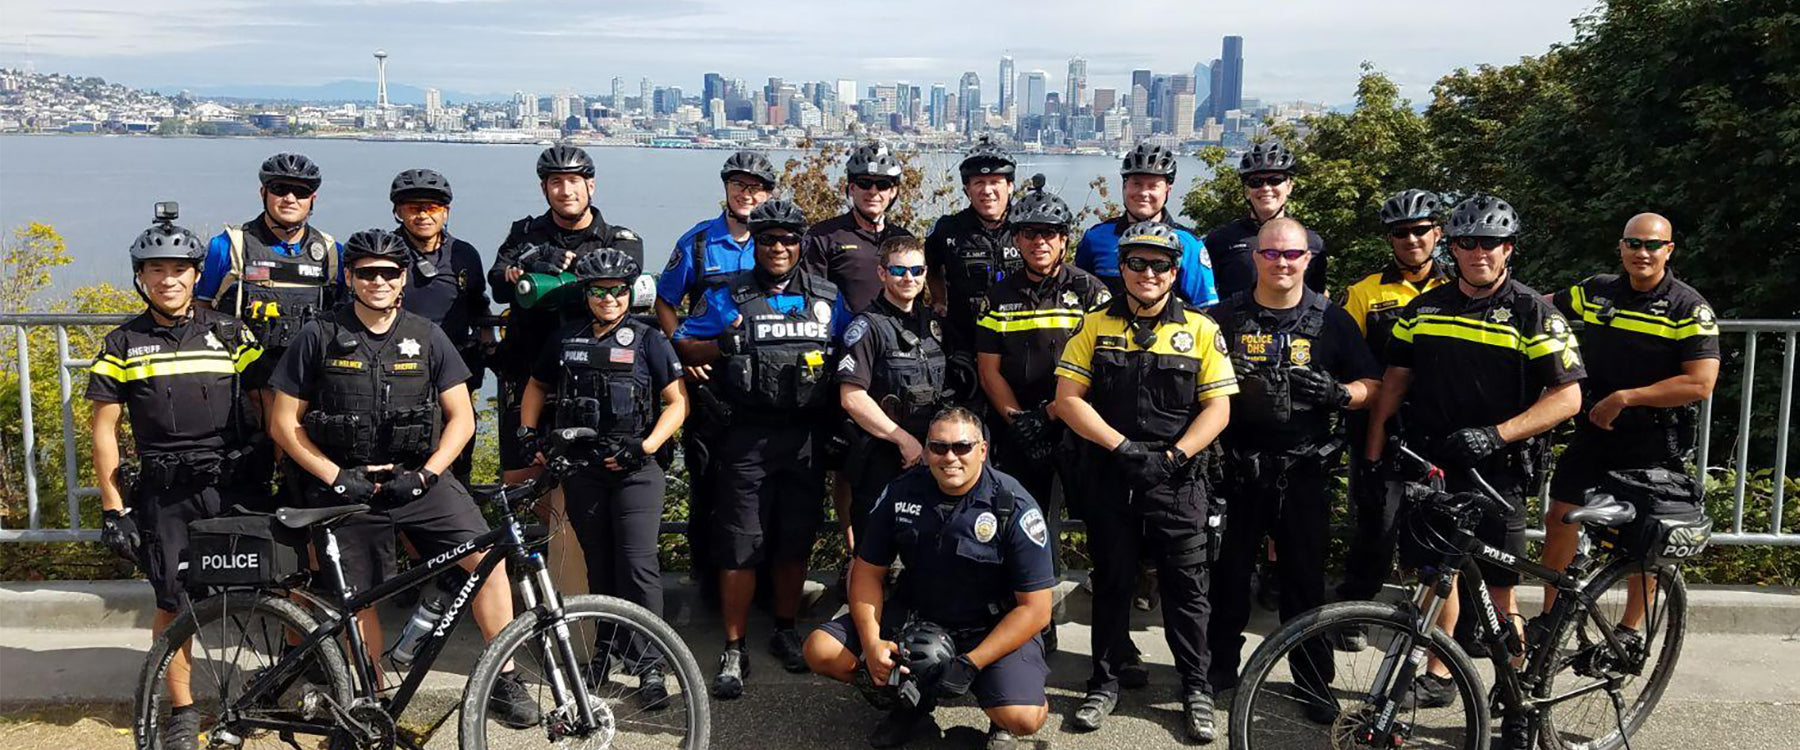 Bicycle officers in uniform